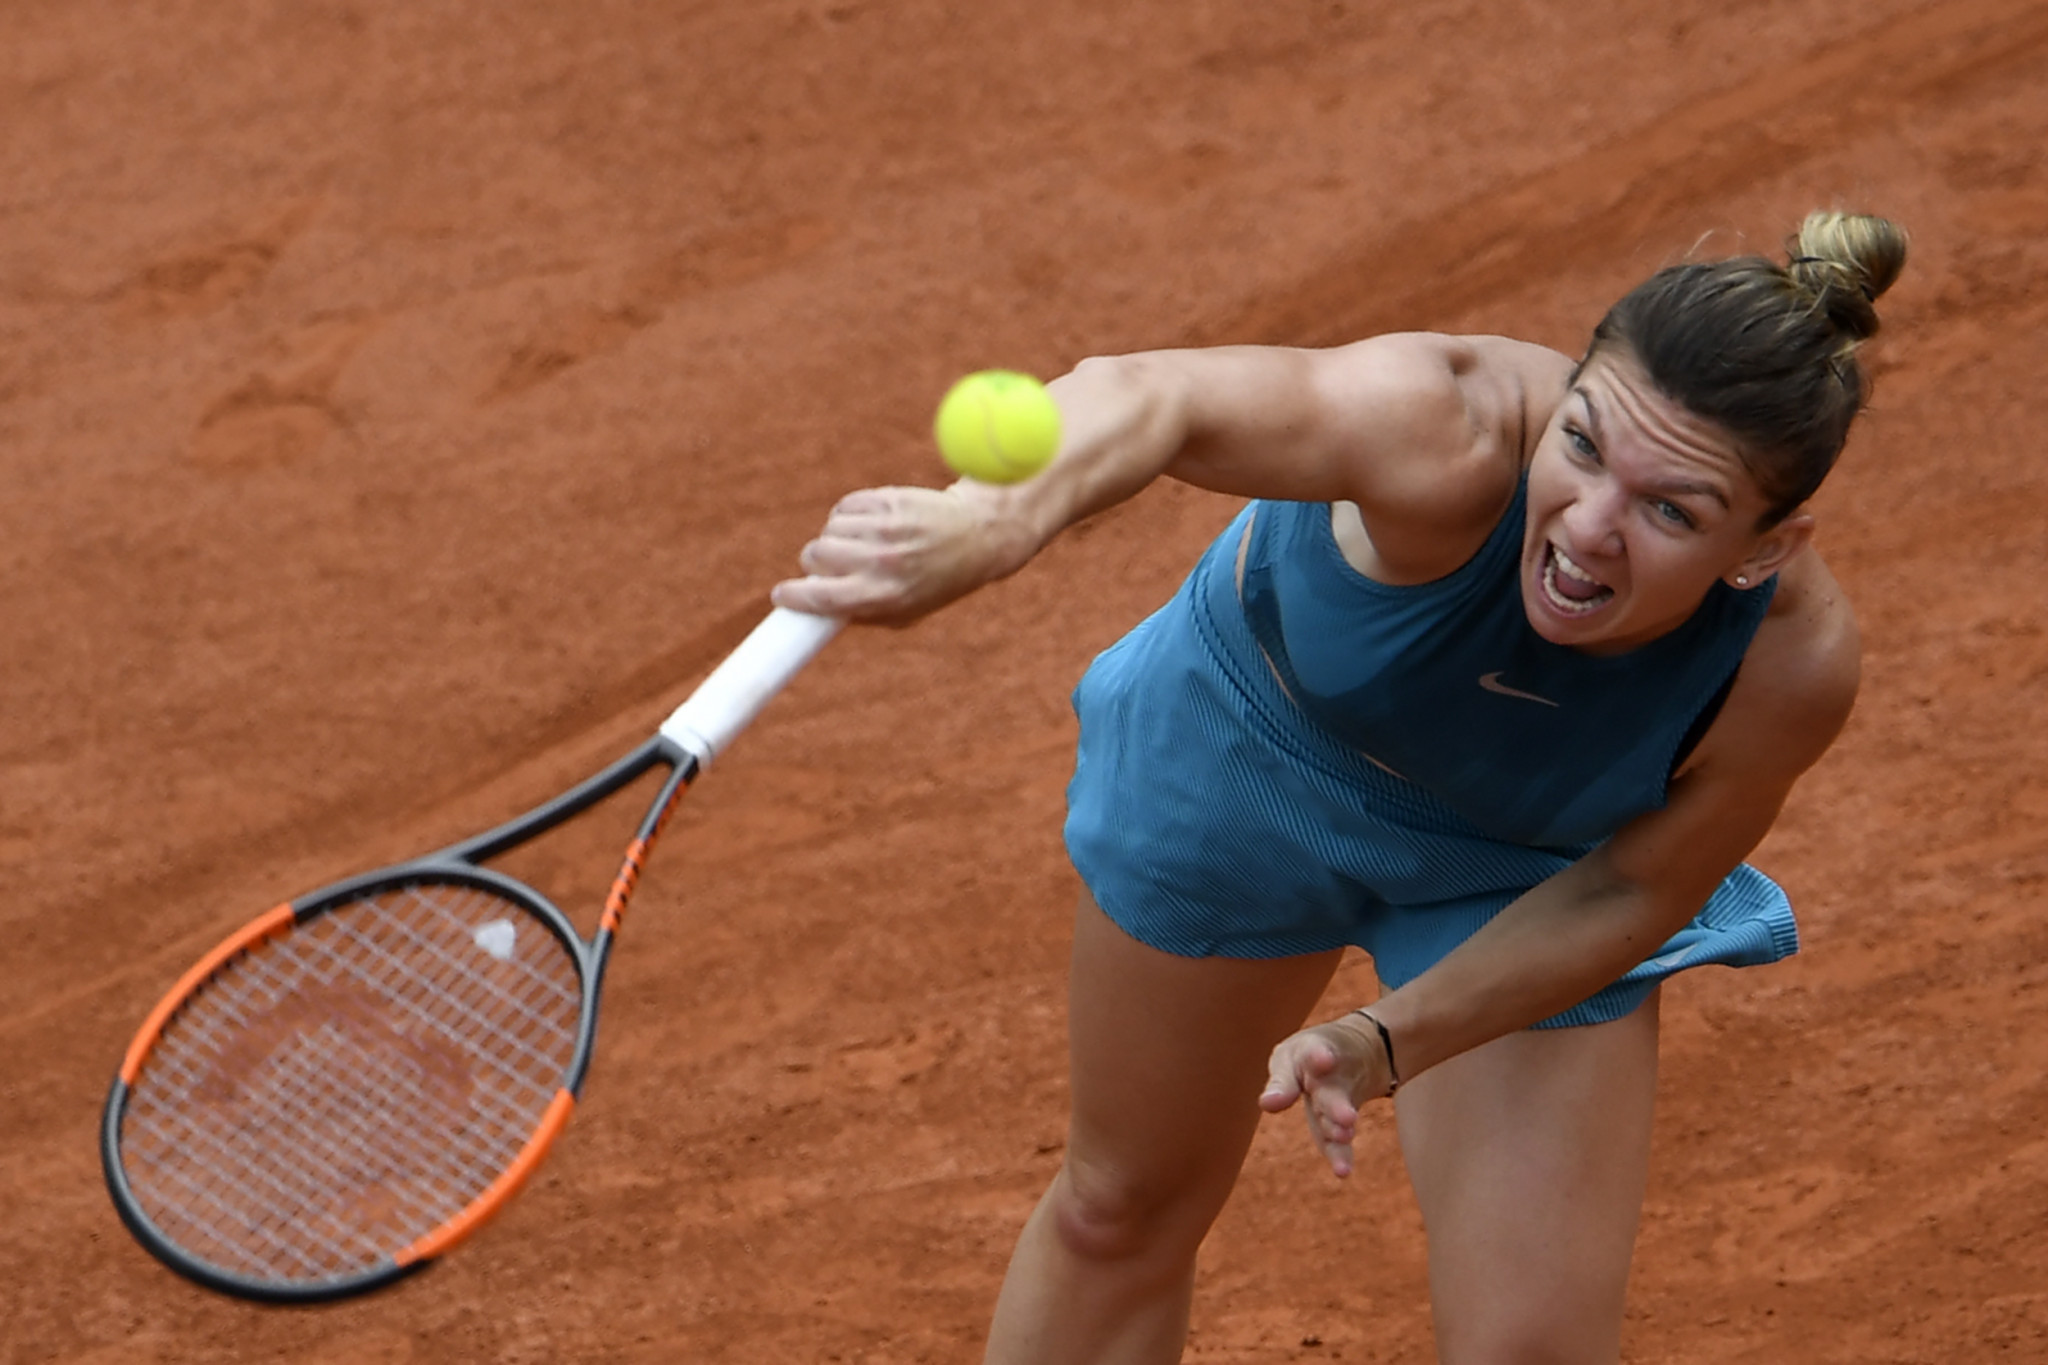 Halep begins well in pursuit of first Grand Slam title at French Open